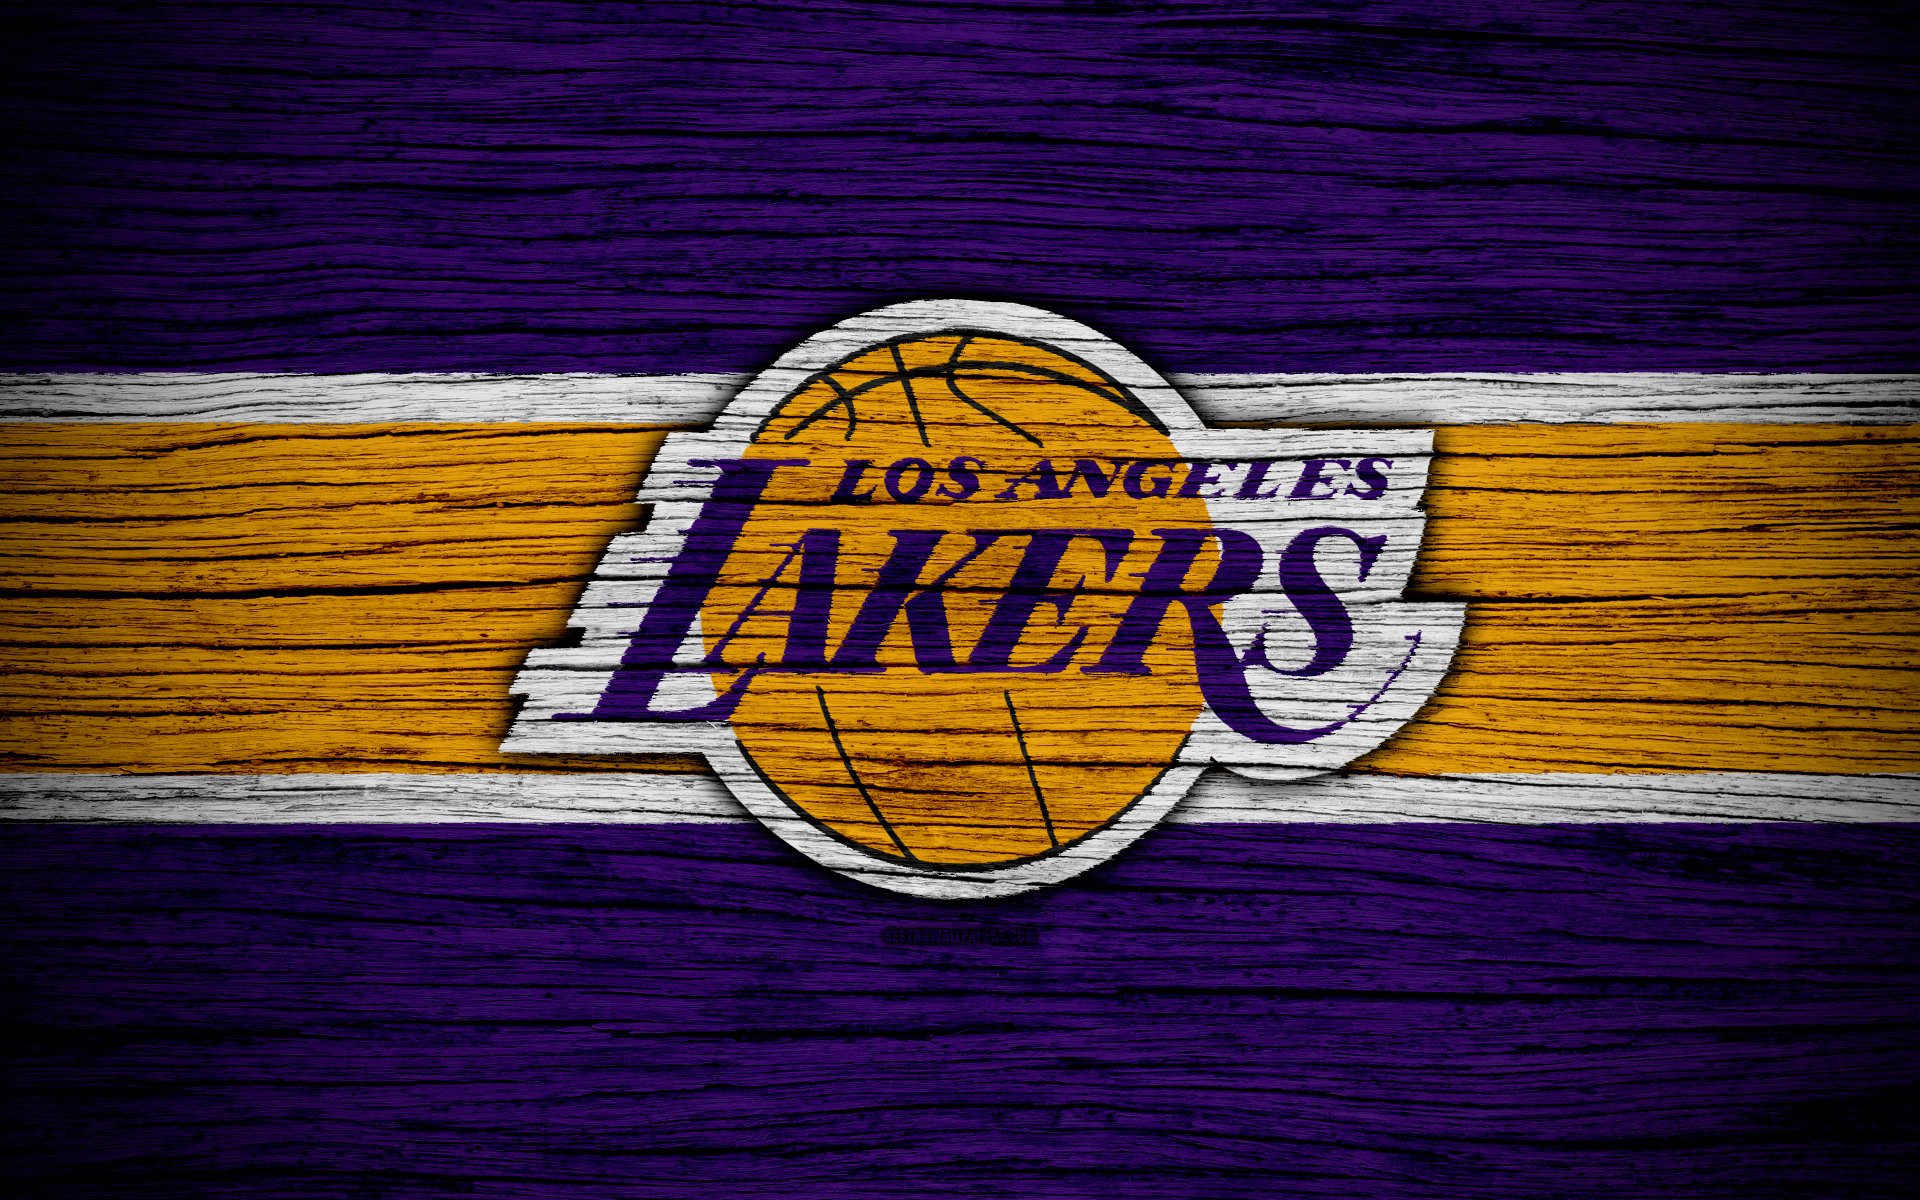 lakers